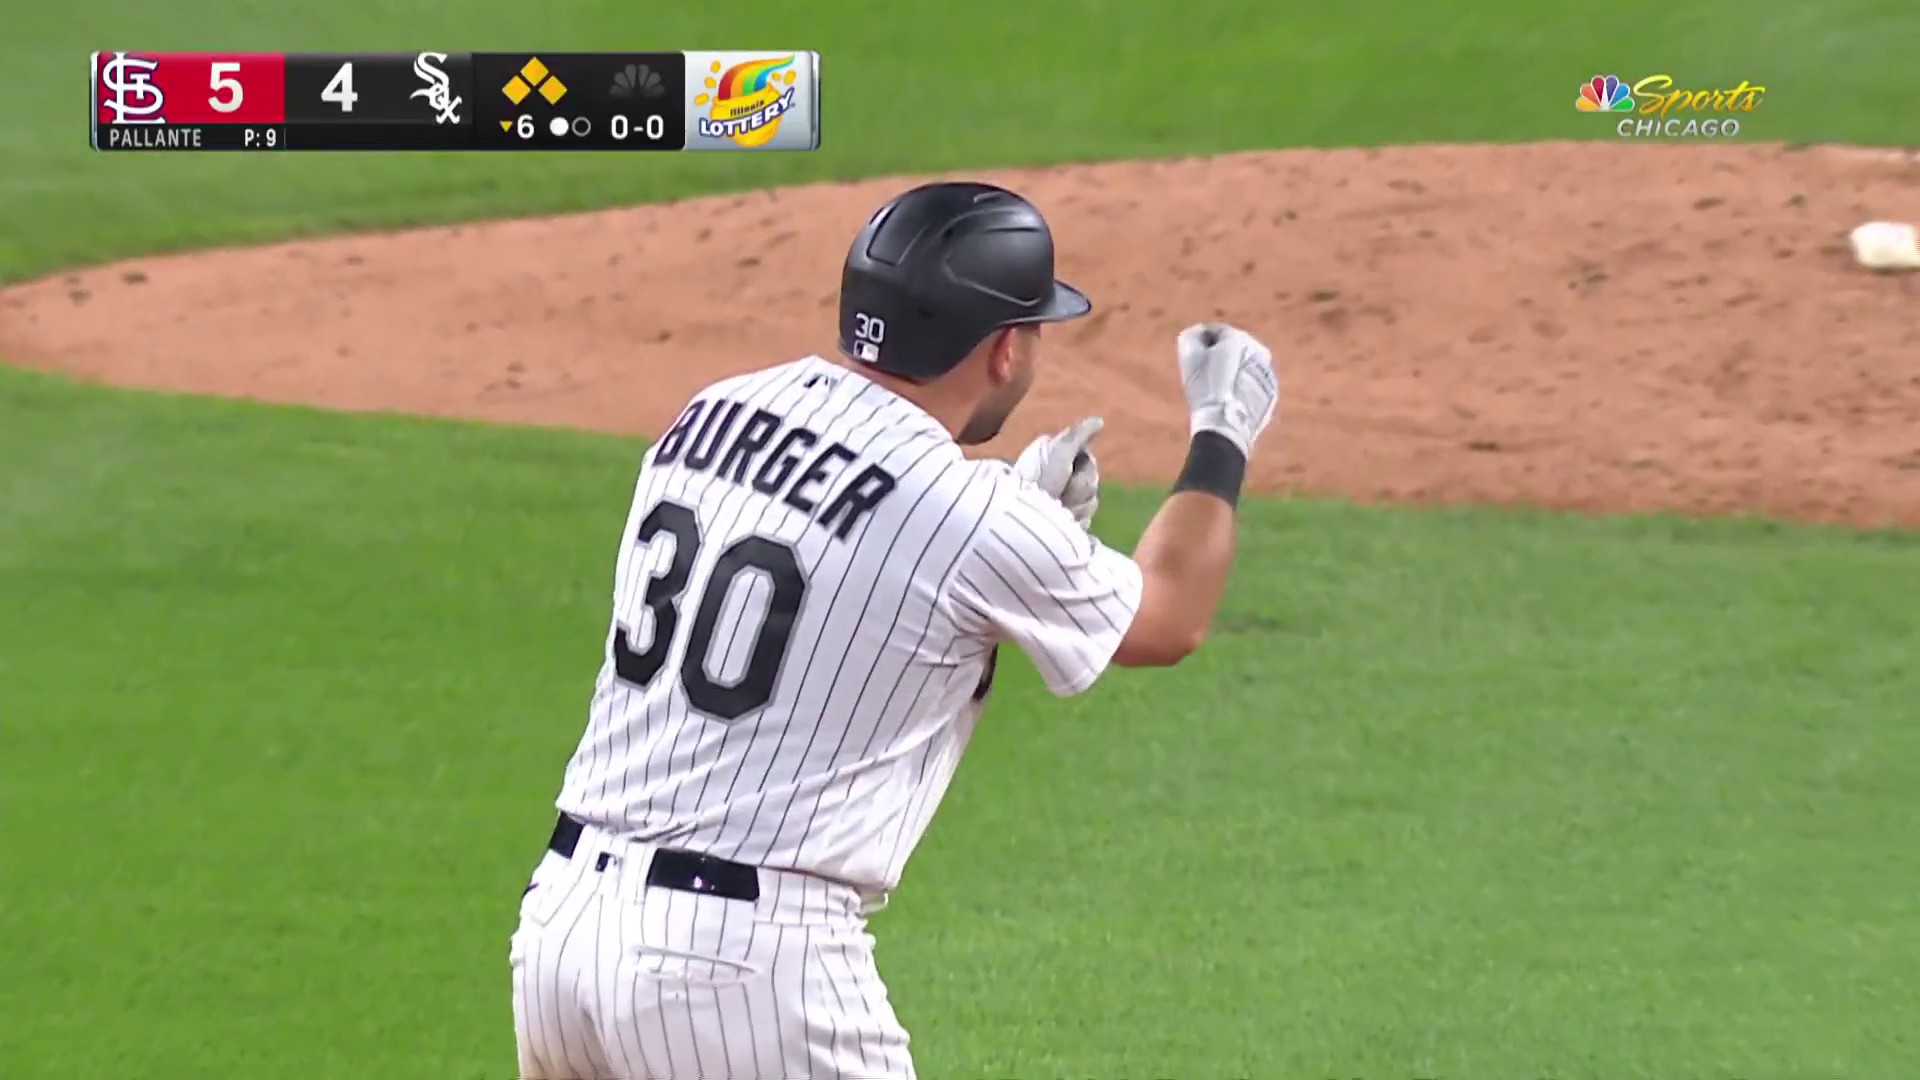 HIGHLIGHTS: Jake Burger Launches 3-Run RBI Double in Win Over